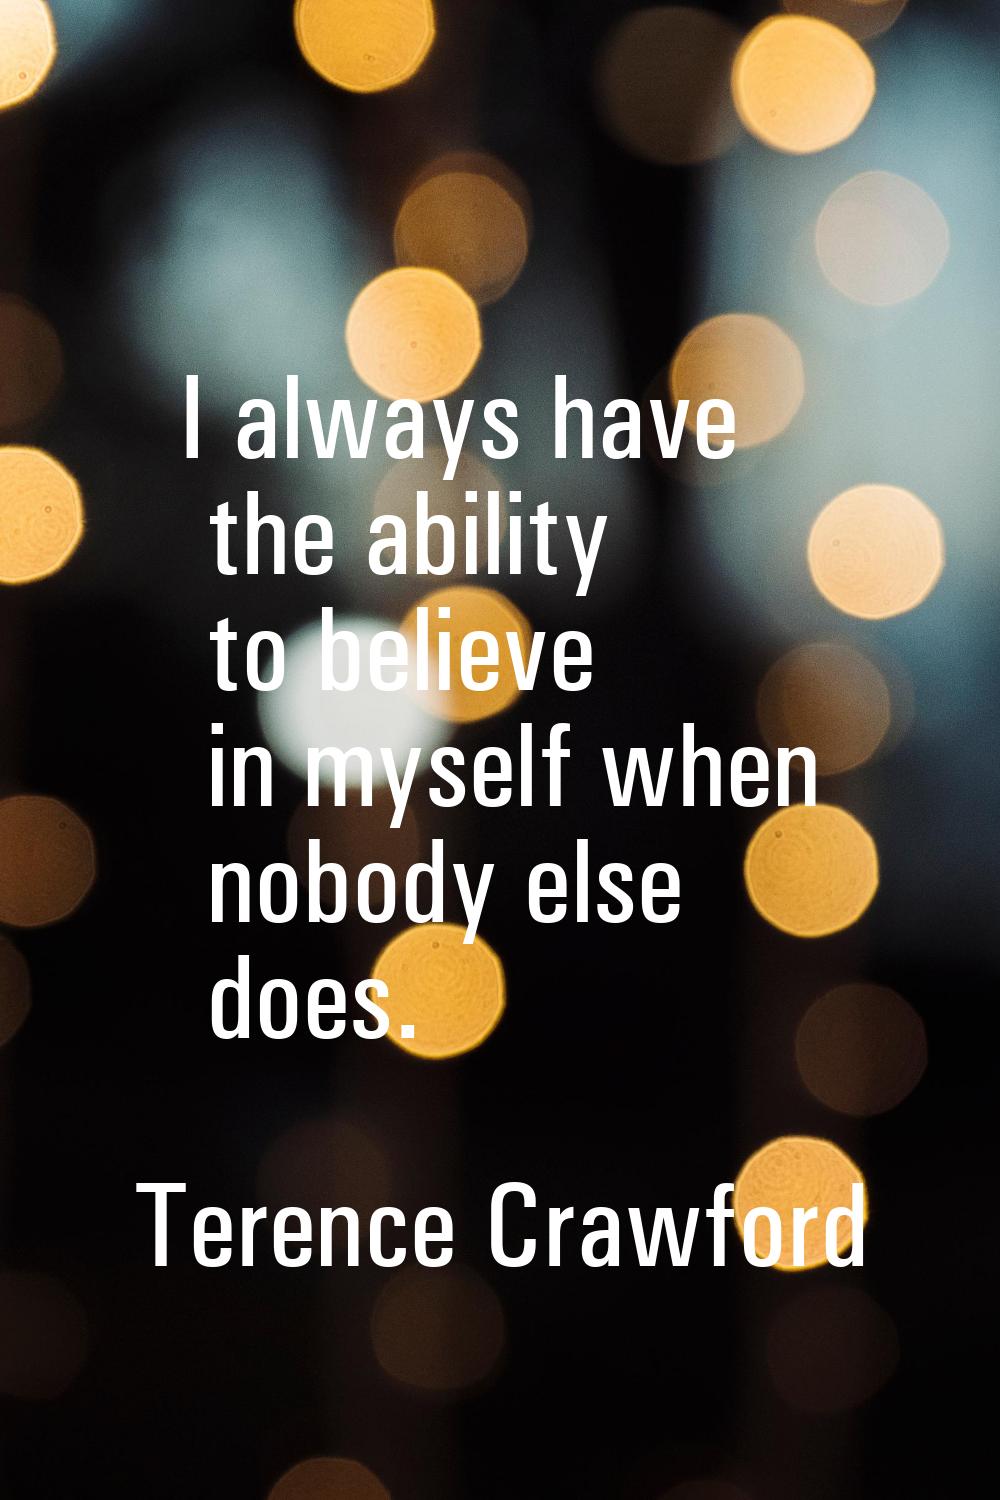 I always have the ability to believe in myself when nobody else does.